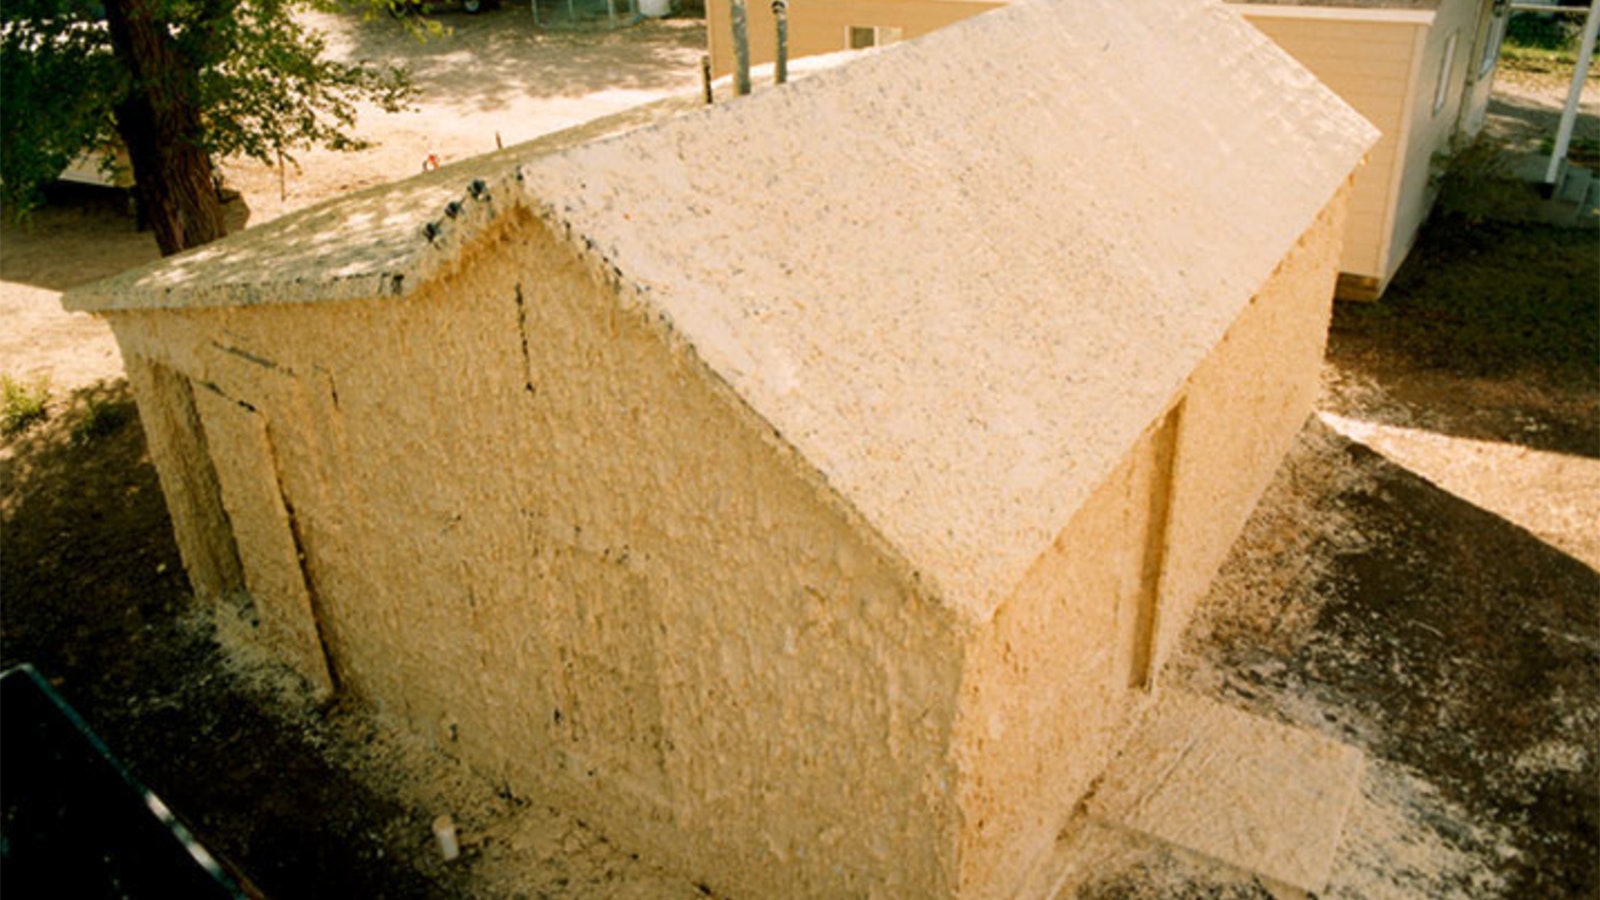 An abandoned house in Powell, Wyoming, was covered in nearly 13,000 pounds of pepper jack cheese by artist Cosimo Cavallero in October 2001.